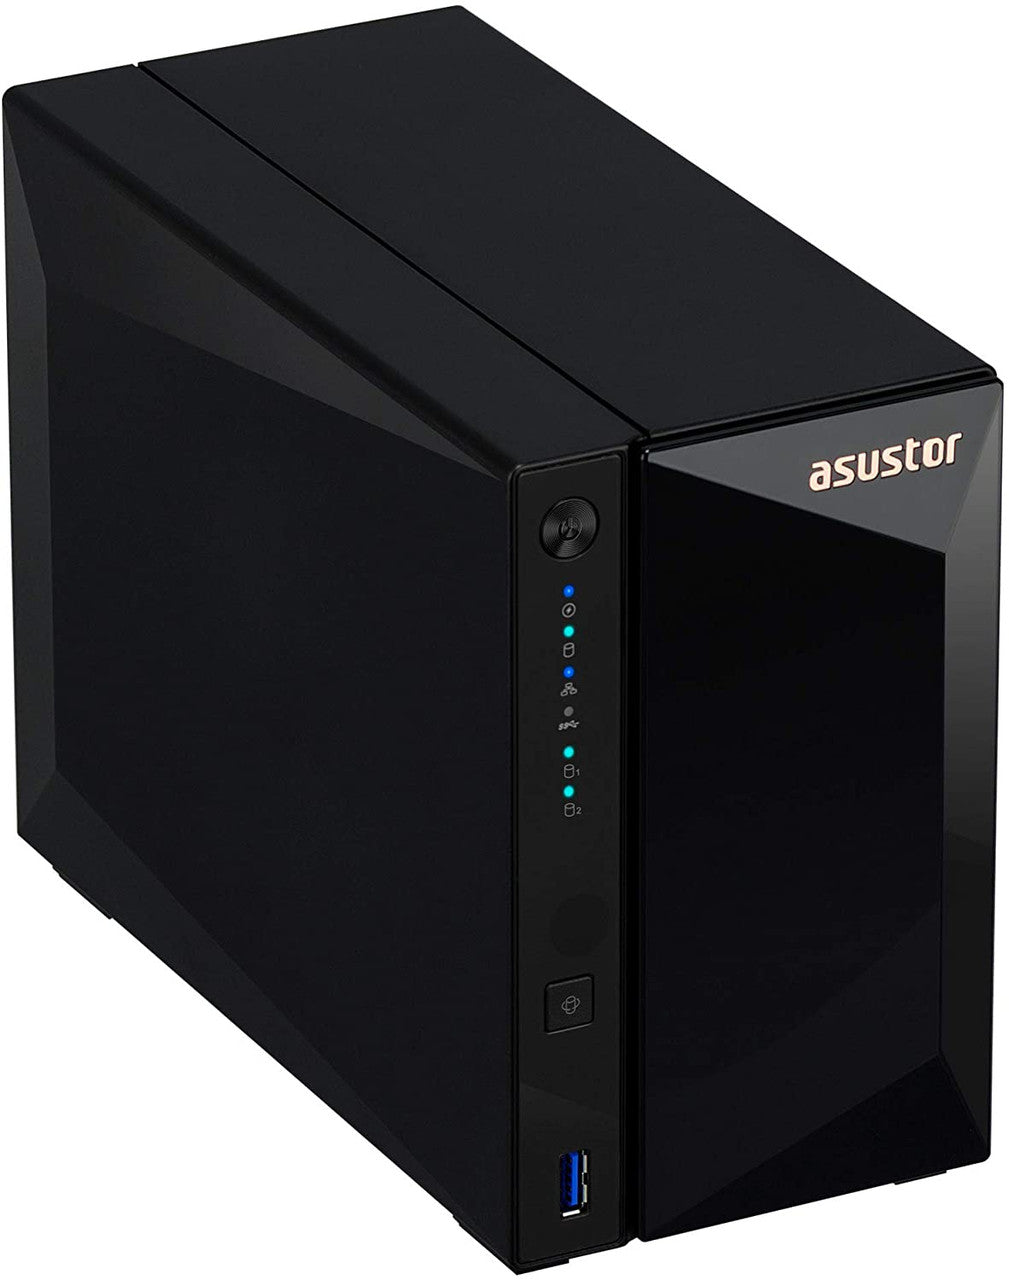 Asustor AS3302T 2-Bay Drivestor 2 PRO NAS with 2GB RAM and 6TB (2x3TB) Western Digital RED Plus Drives Fully Assembled and Tested